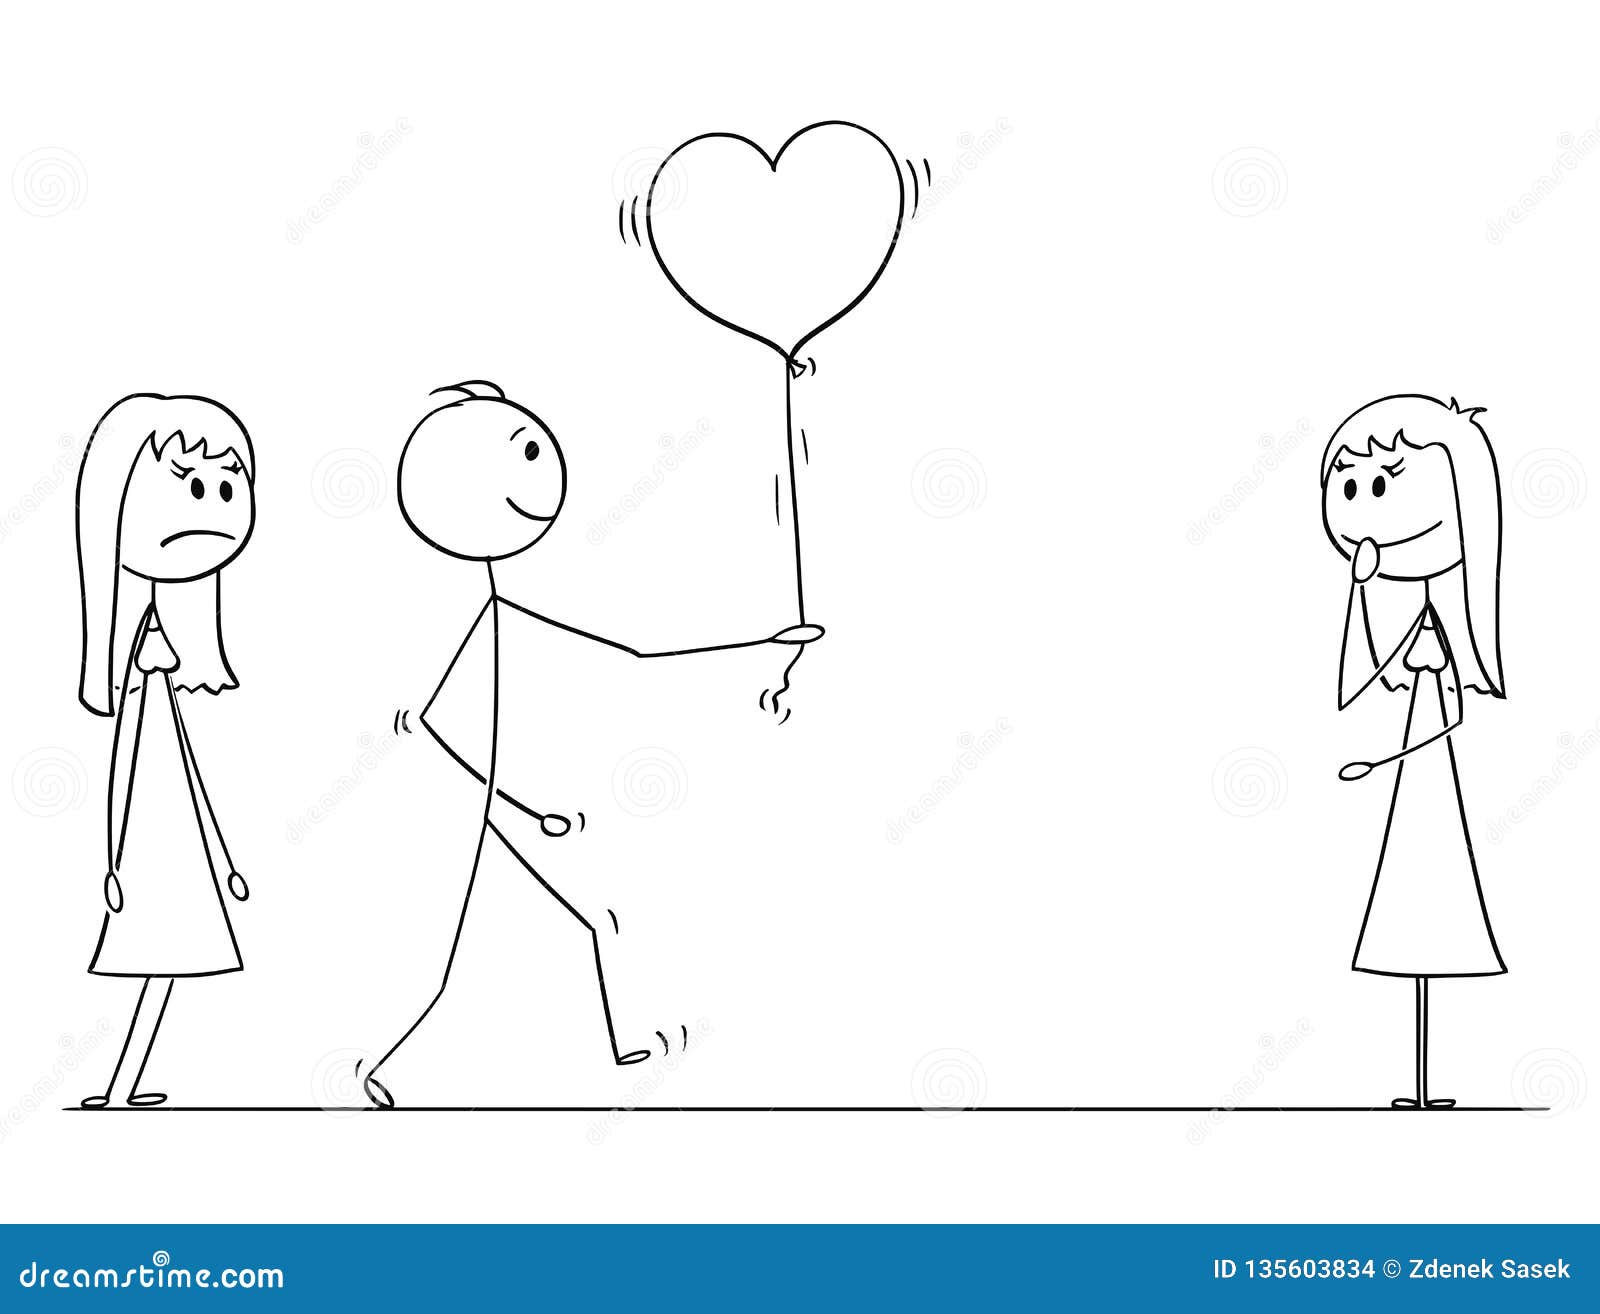 Stick Character Cartoon Of Loving Man Or Boy Giving Balloon Heart To One Woman Or Girl Instead Of Another Stock Vector Illustration Of Humor Metaphor